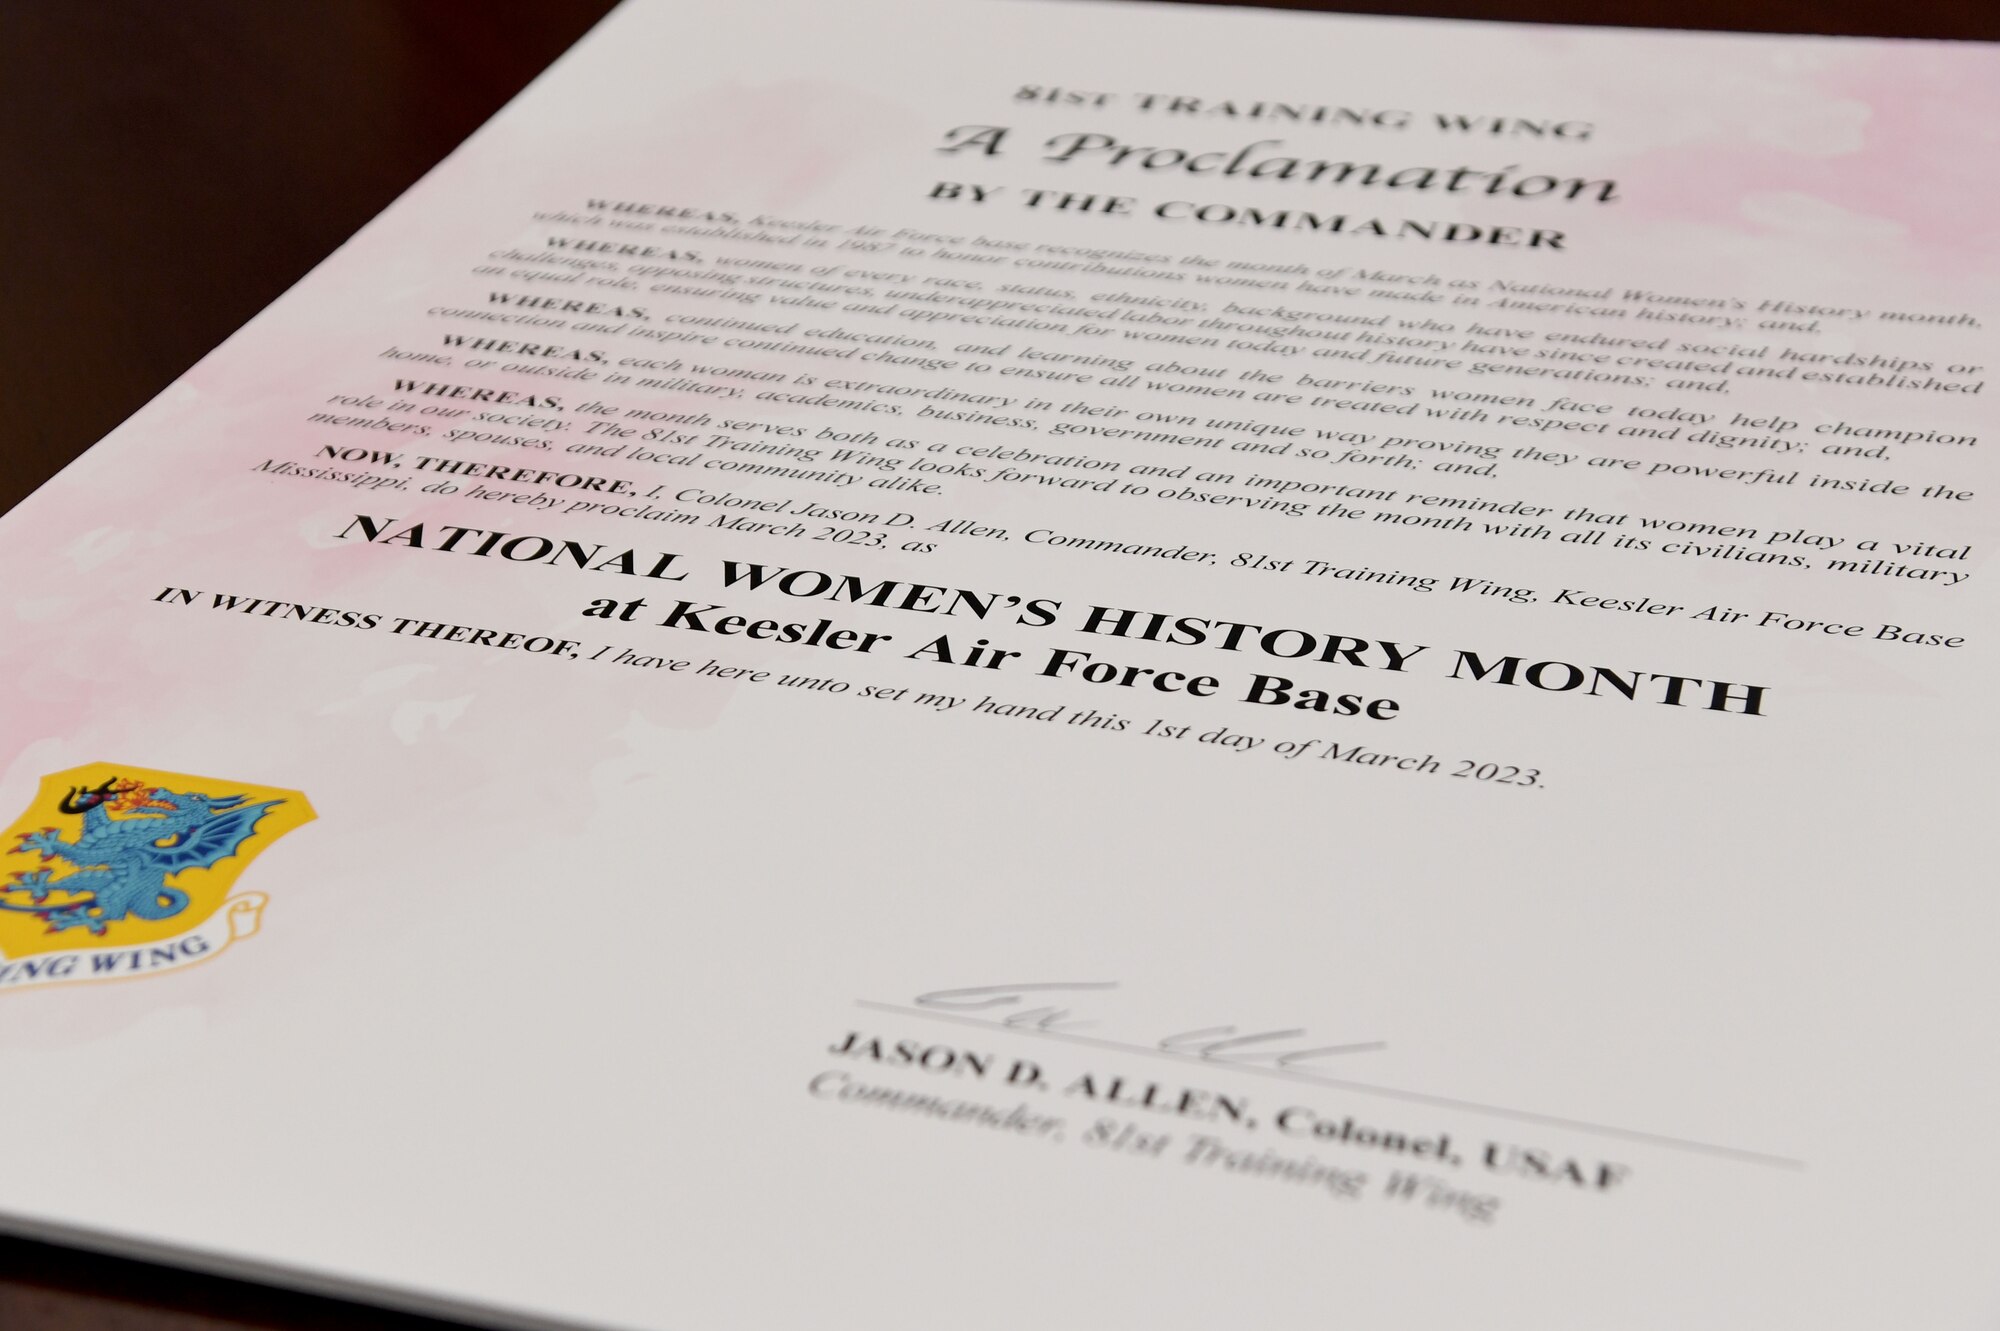 The National Women's History Month Proclamation is displayed inside the 81st Training Wing headquarters building at Keesler Air Force Base, Mississippi, March 1, 2023.